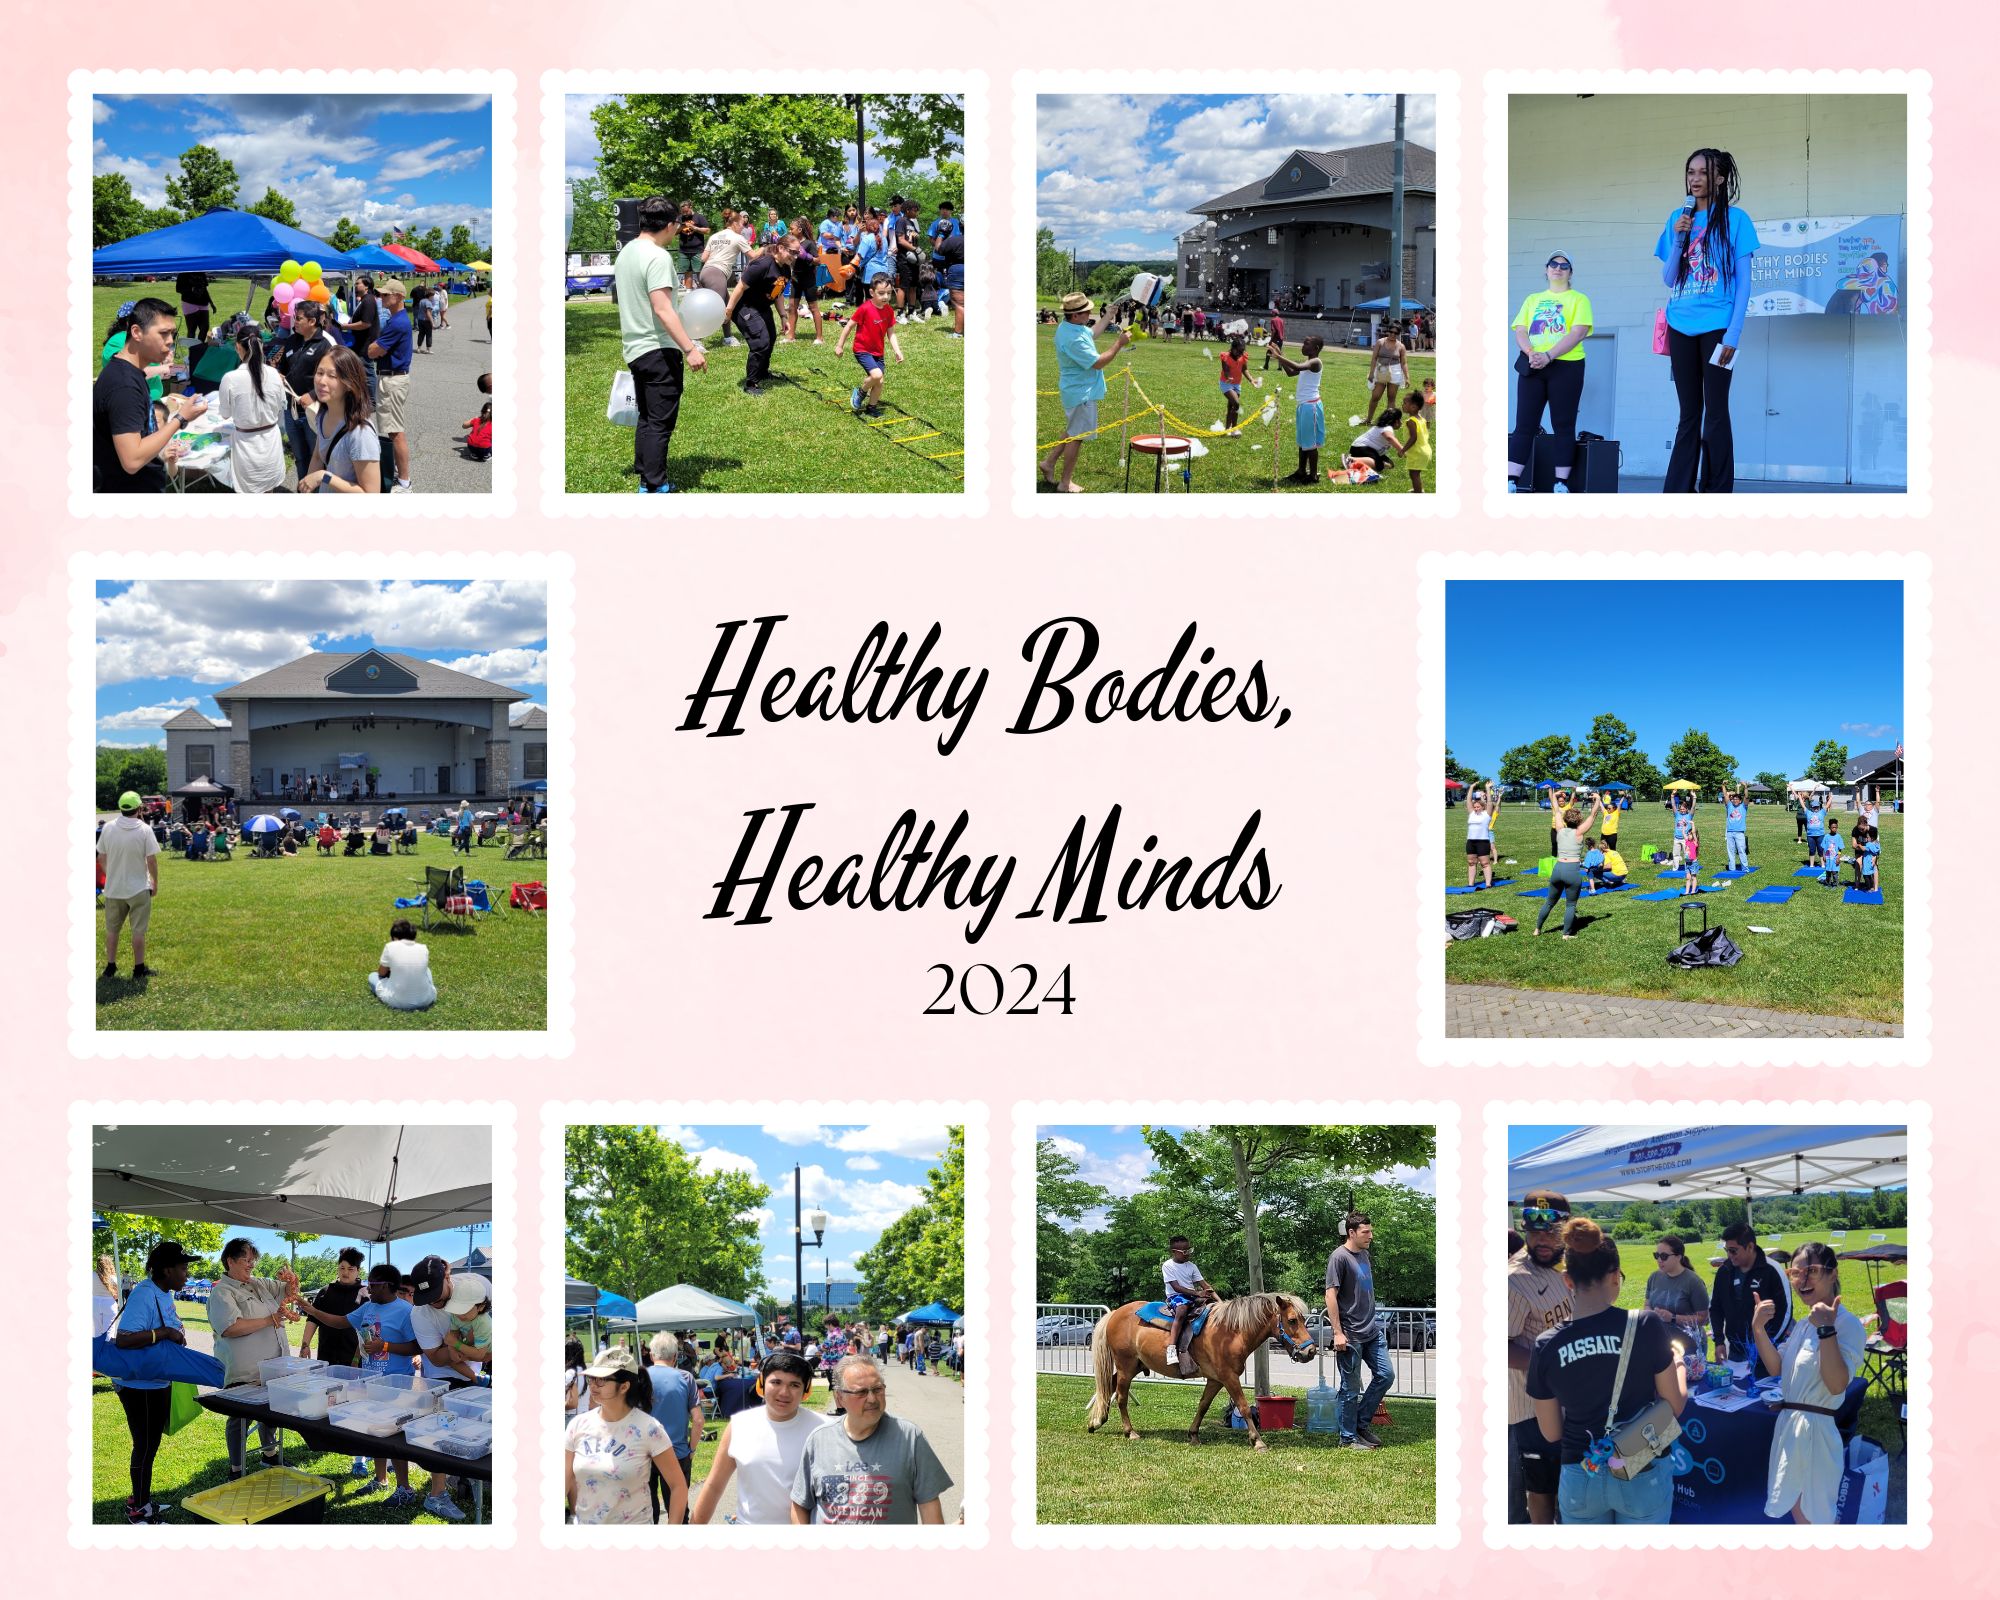 Celebrating “Healthy Bodies, Healthy Minds” Event for Families